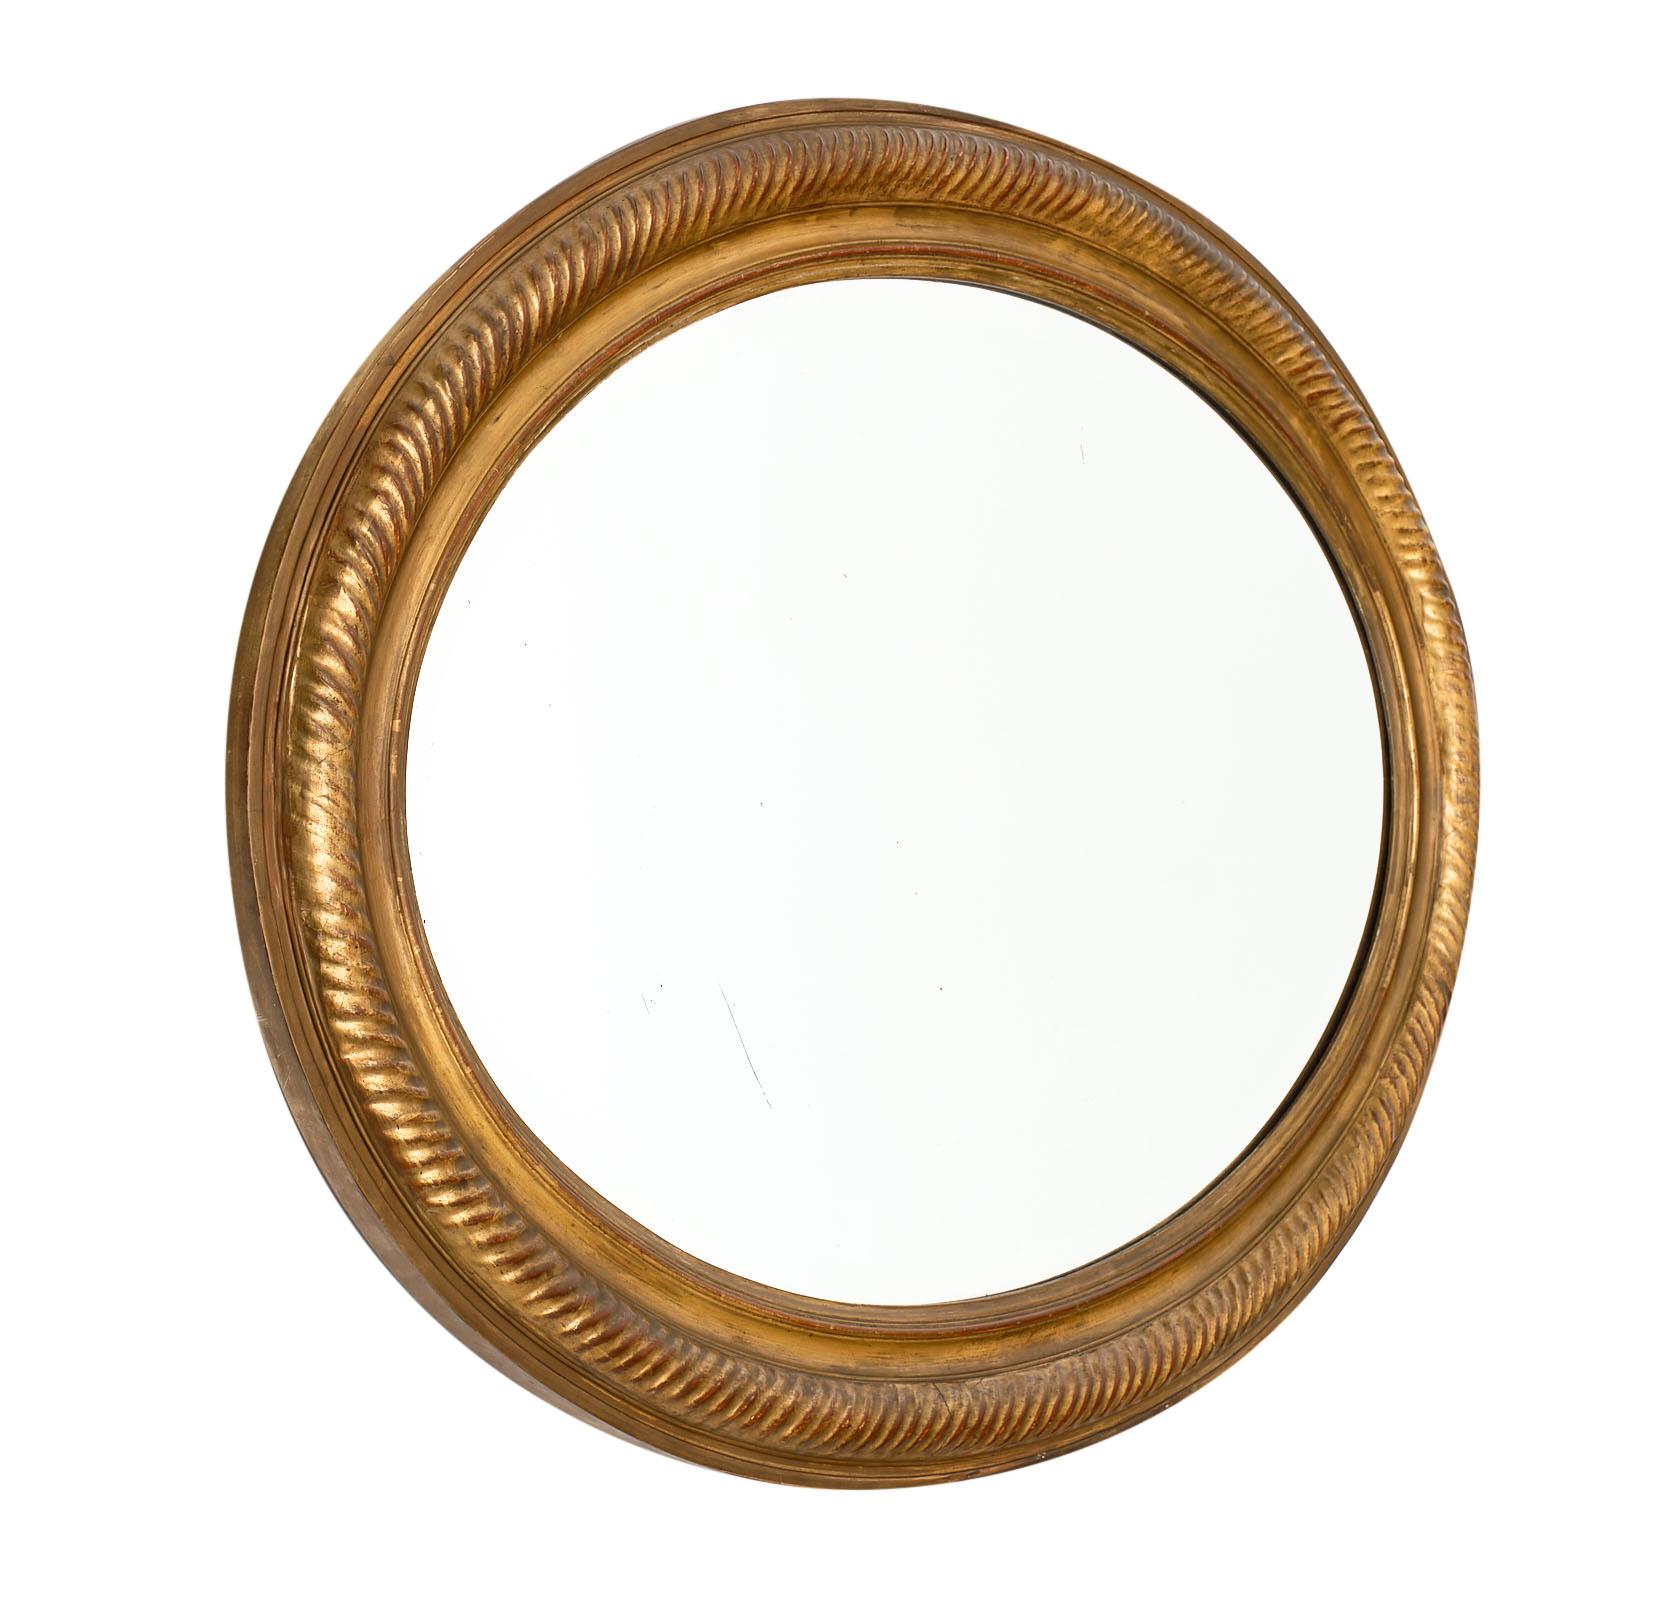 Louis XVI style antique oval mirror with a beautiful gold-leafed and ridged frame. We love the original mirror with beveled edge and the strong presence this piece has. This mirror is from the south of France and has a lovely authenticity.